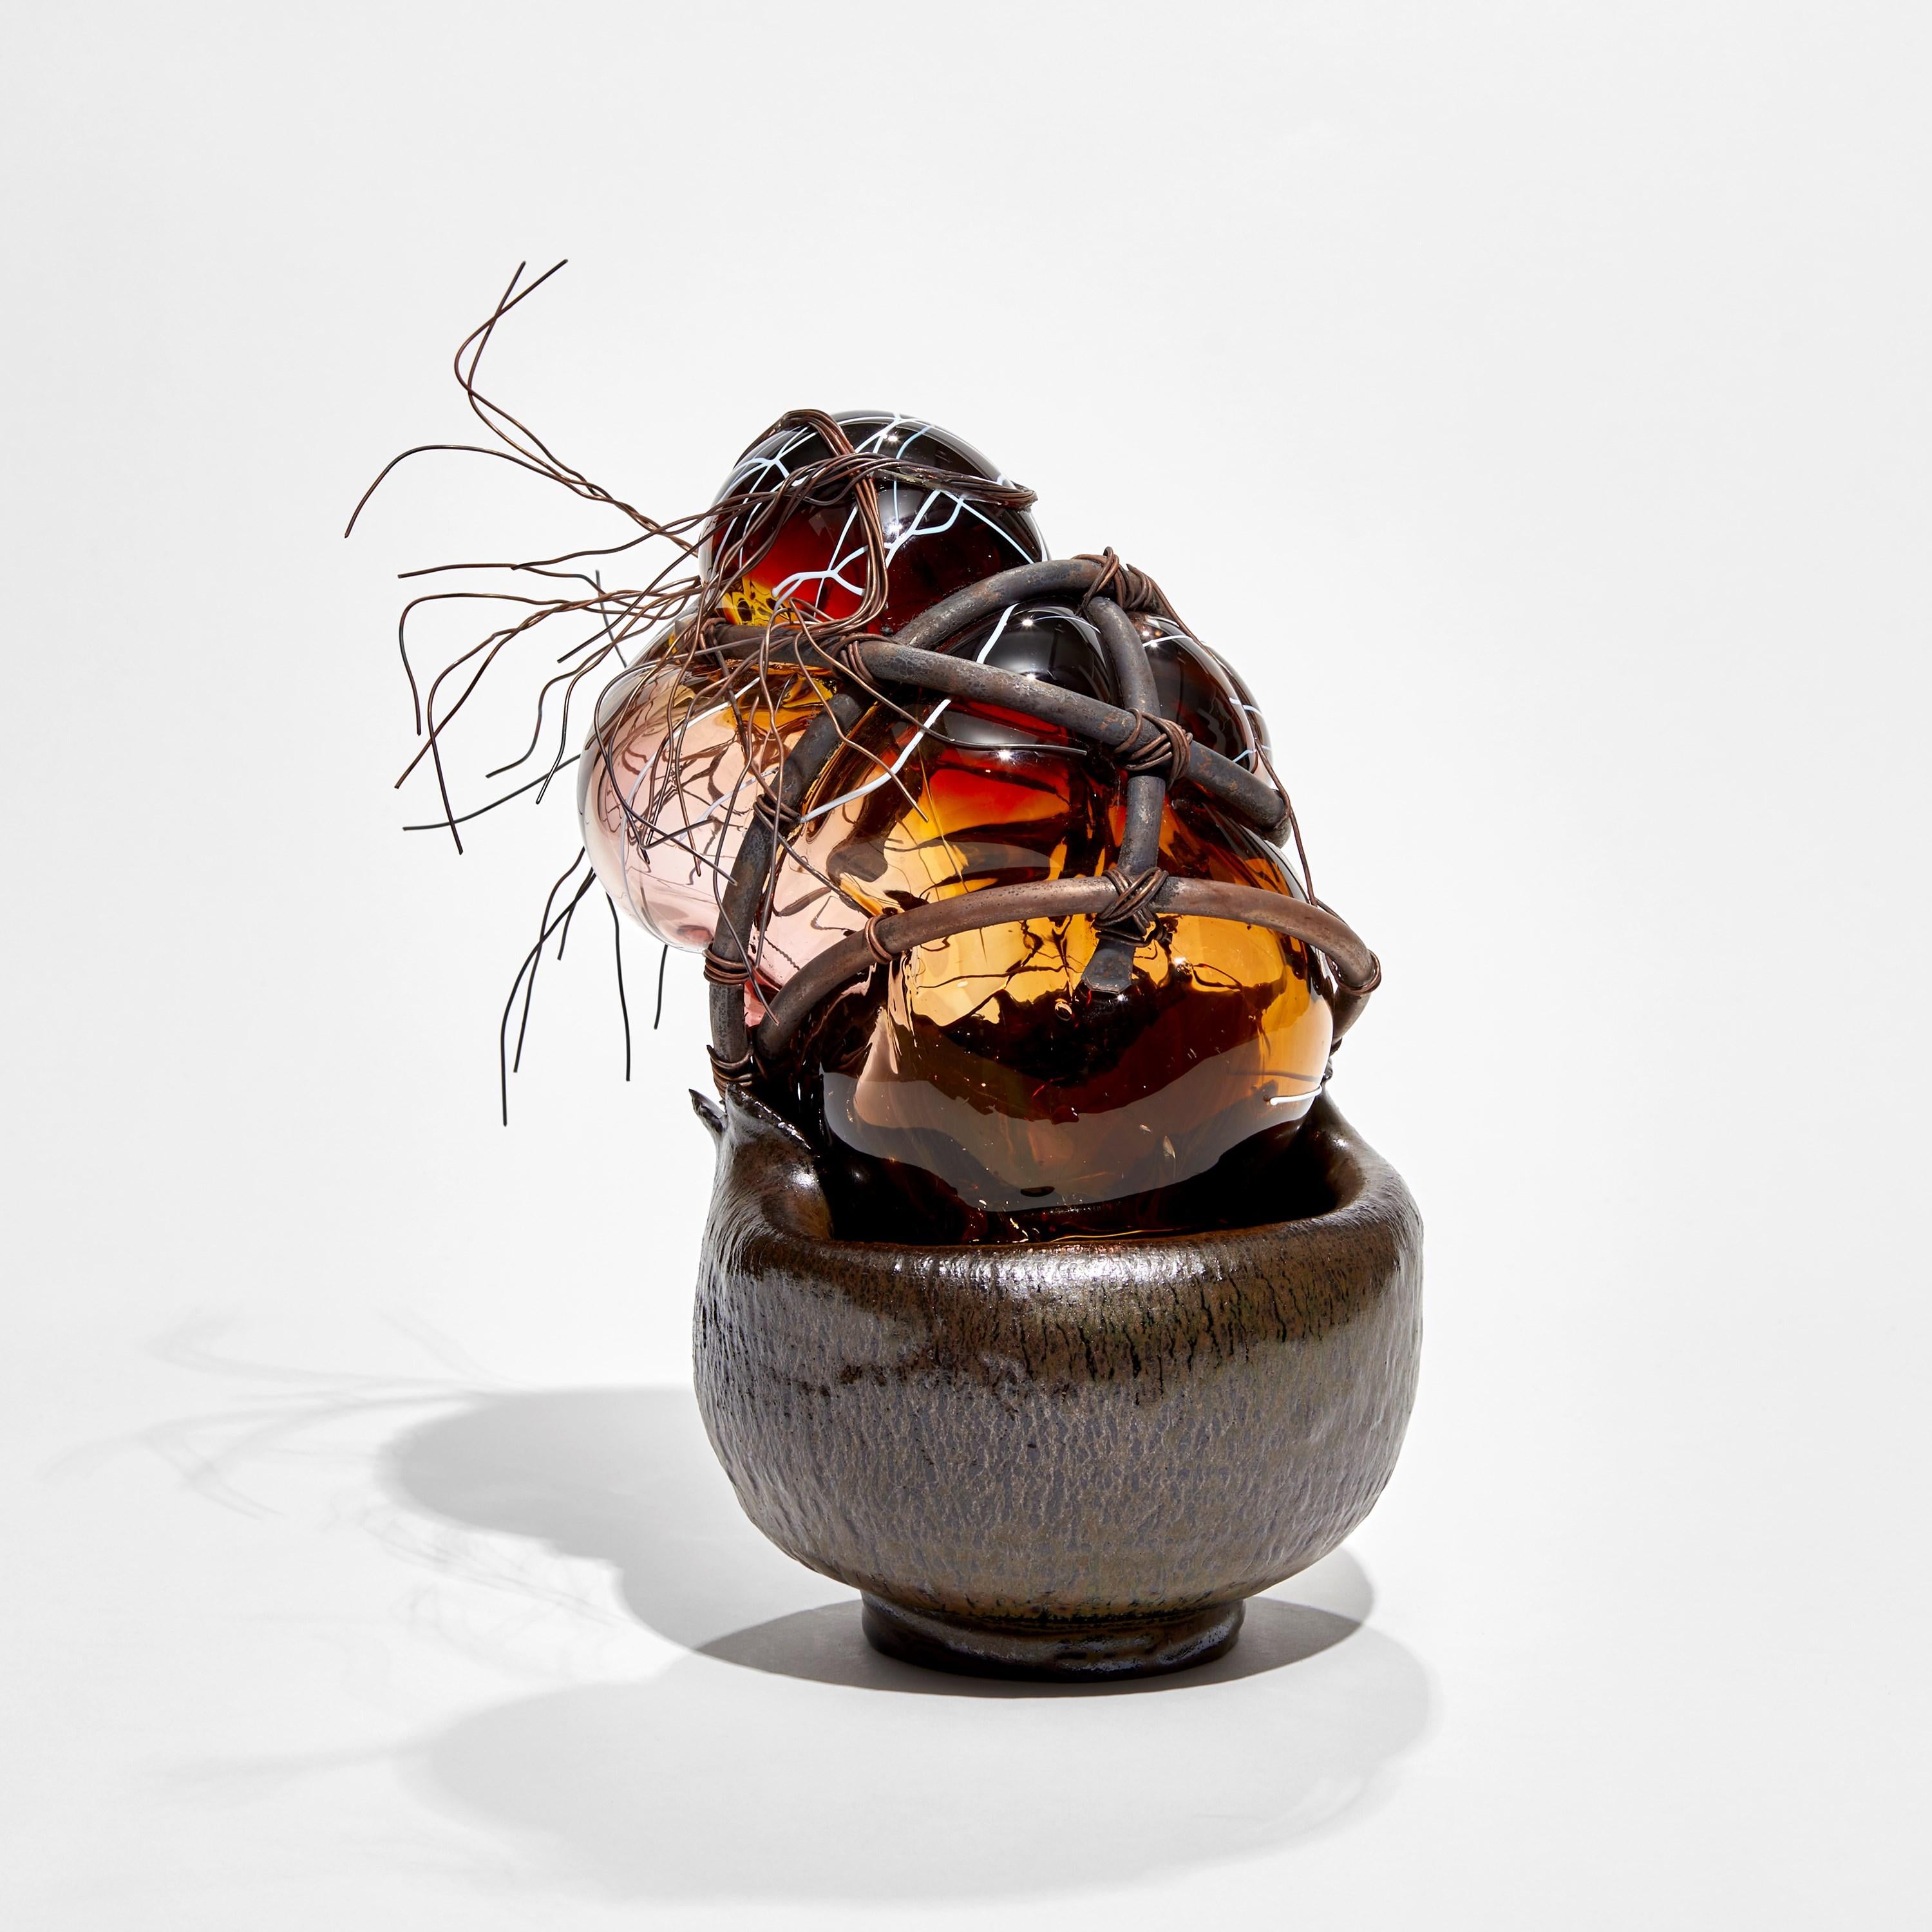 'Strange Fruit - The Congregation V' is a unique sculpture by the British artist, Chris Day, created from handblown & sculpted glass with terracotta, micro bore copper pipe and copper wire.

This piece was created as a part of the artist's ‘Strange